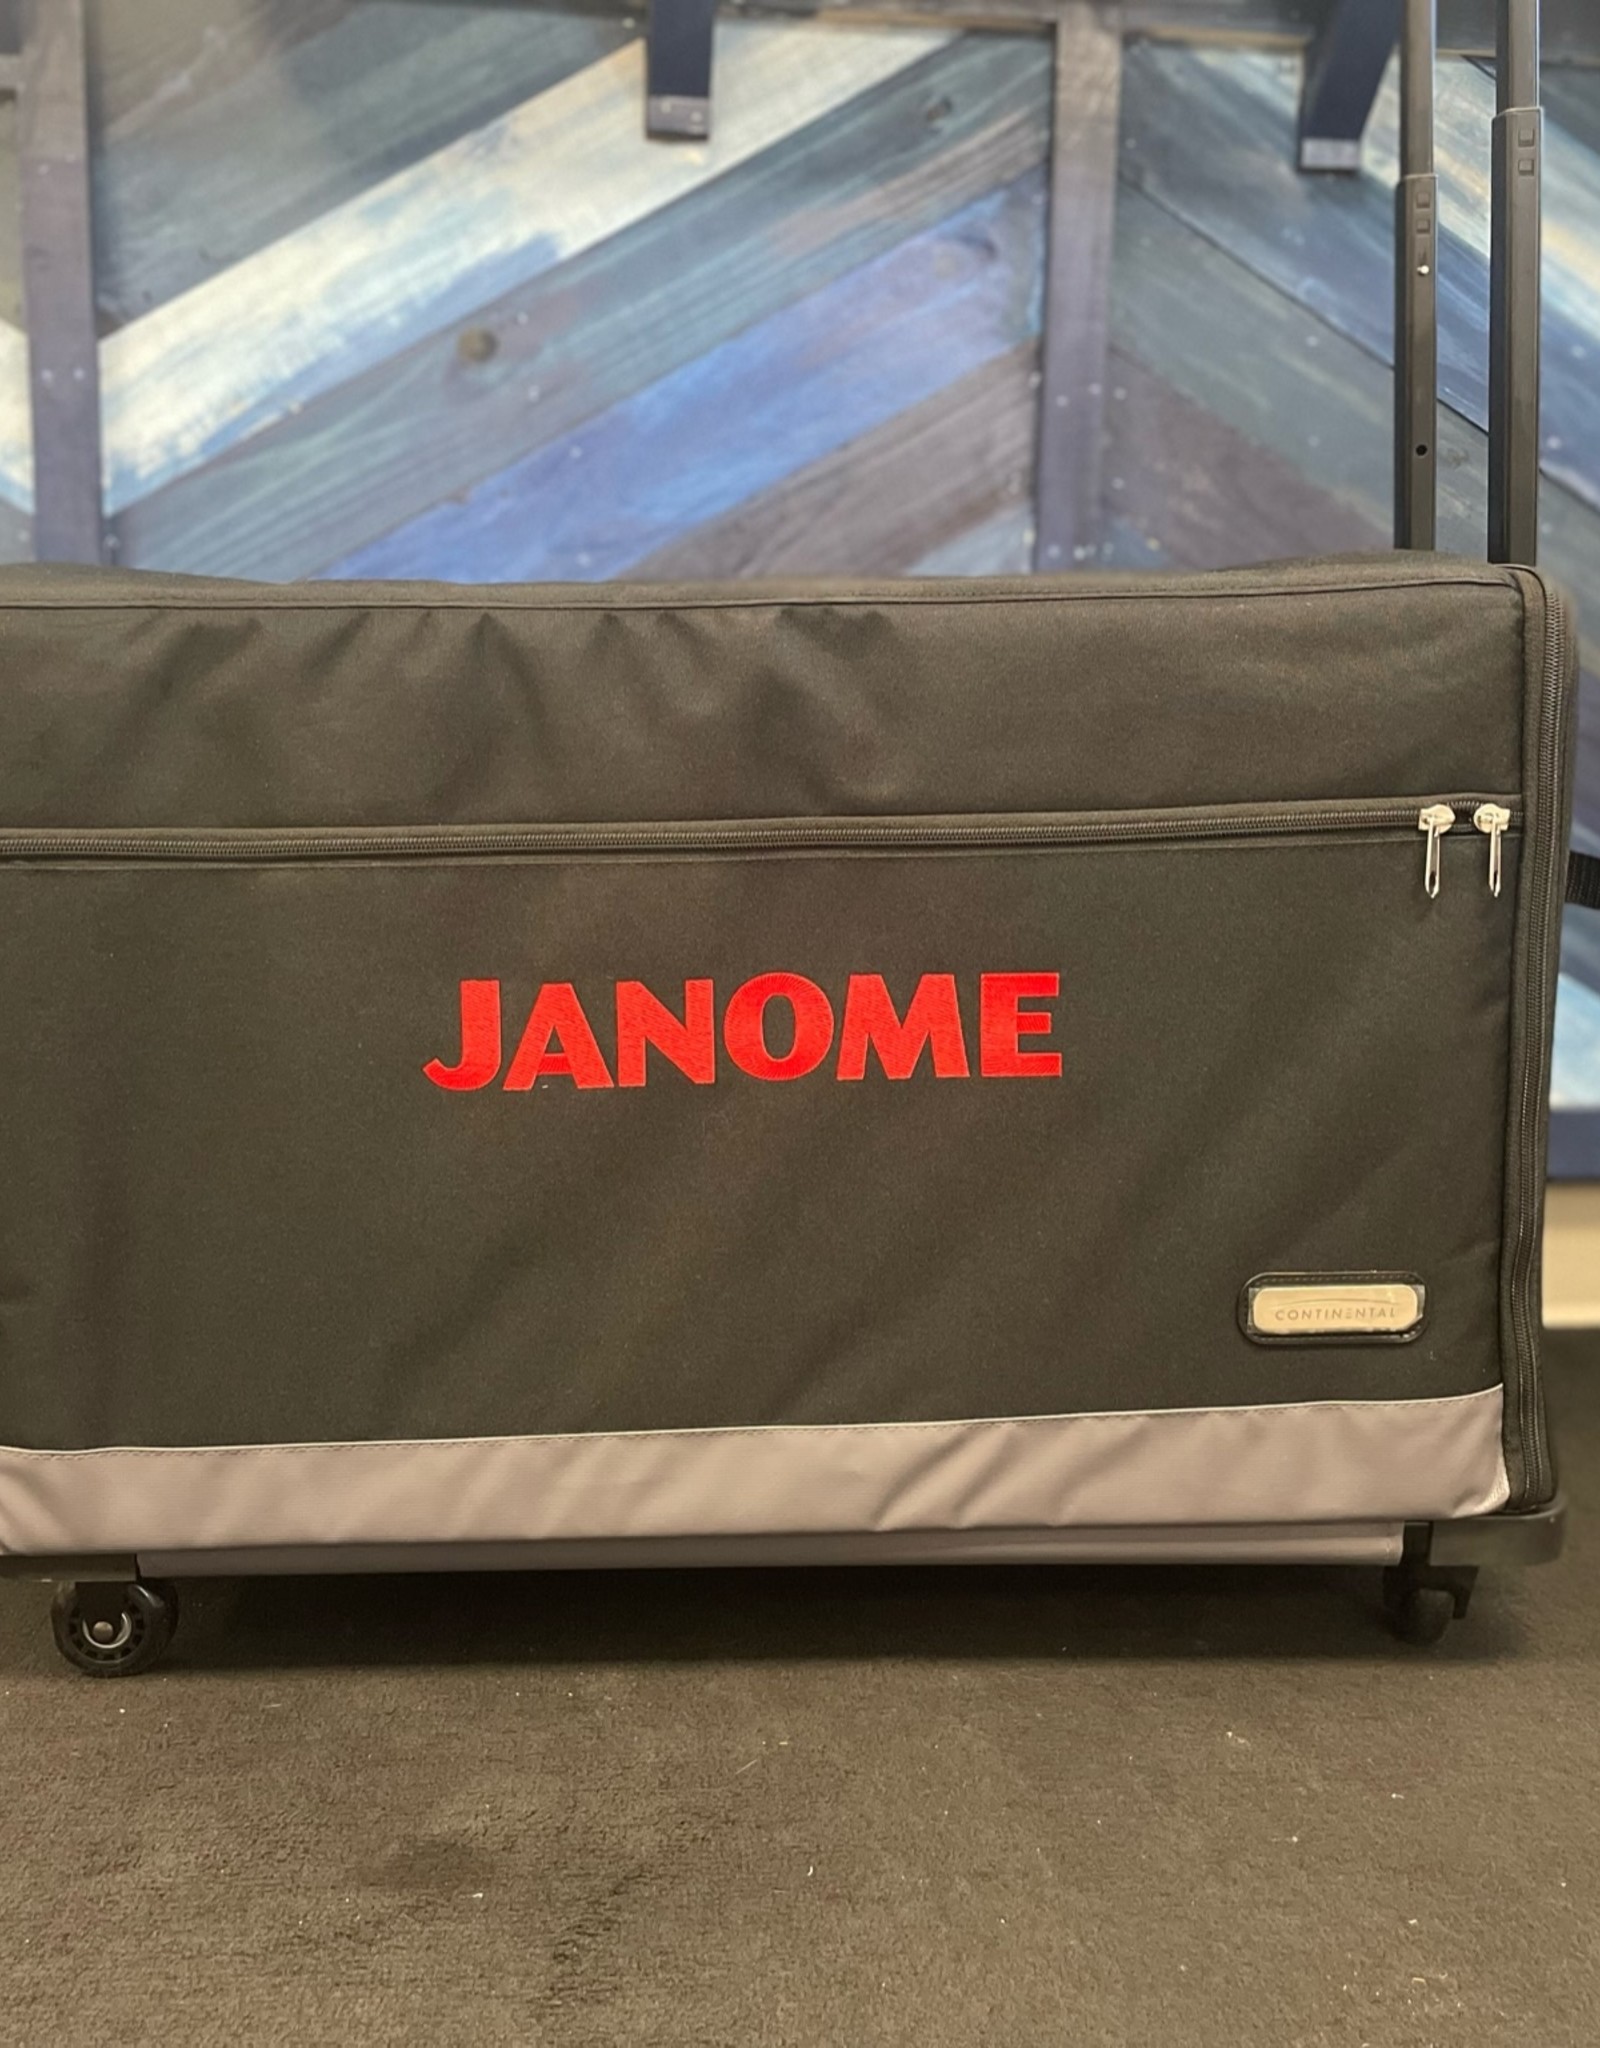 Janome Janome Rolling Carry Case   11.5" x 25.5" x 16"